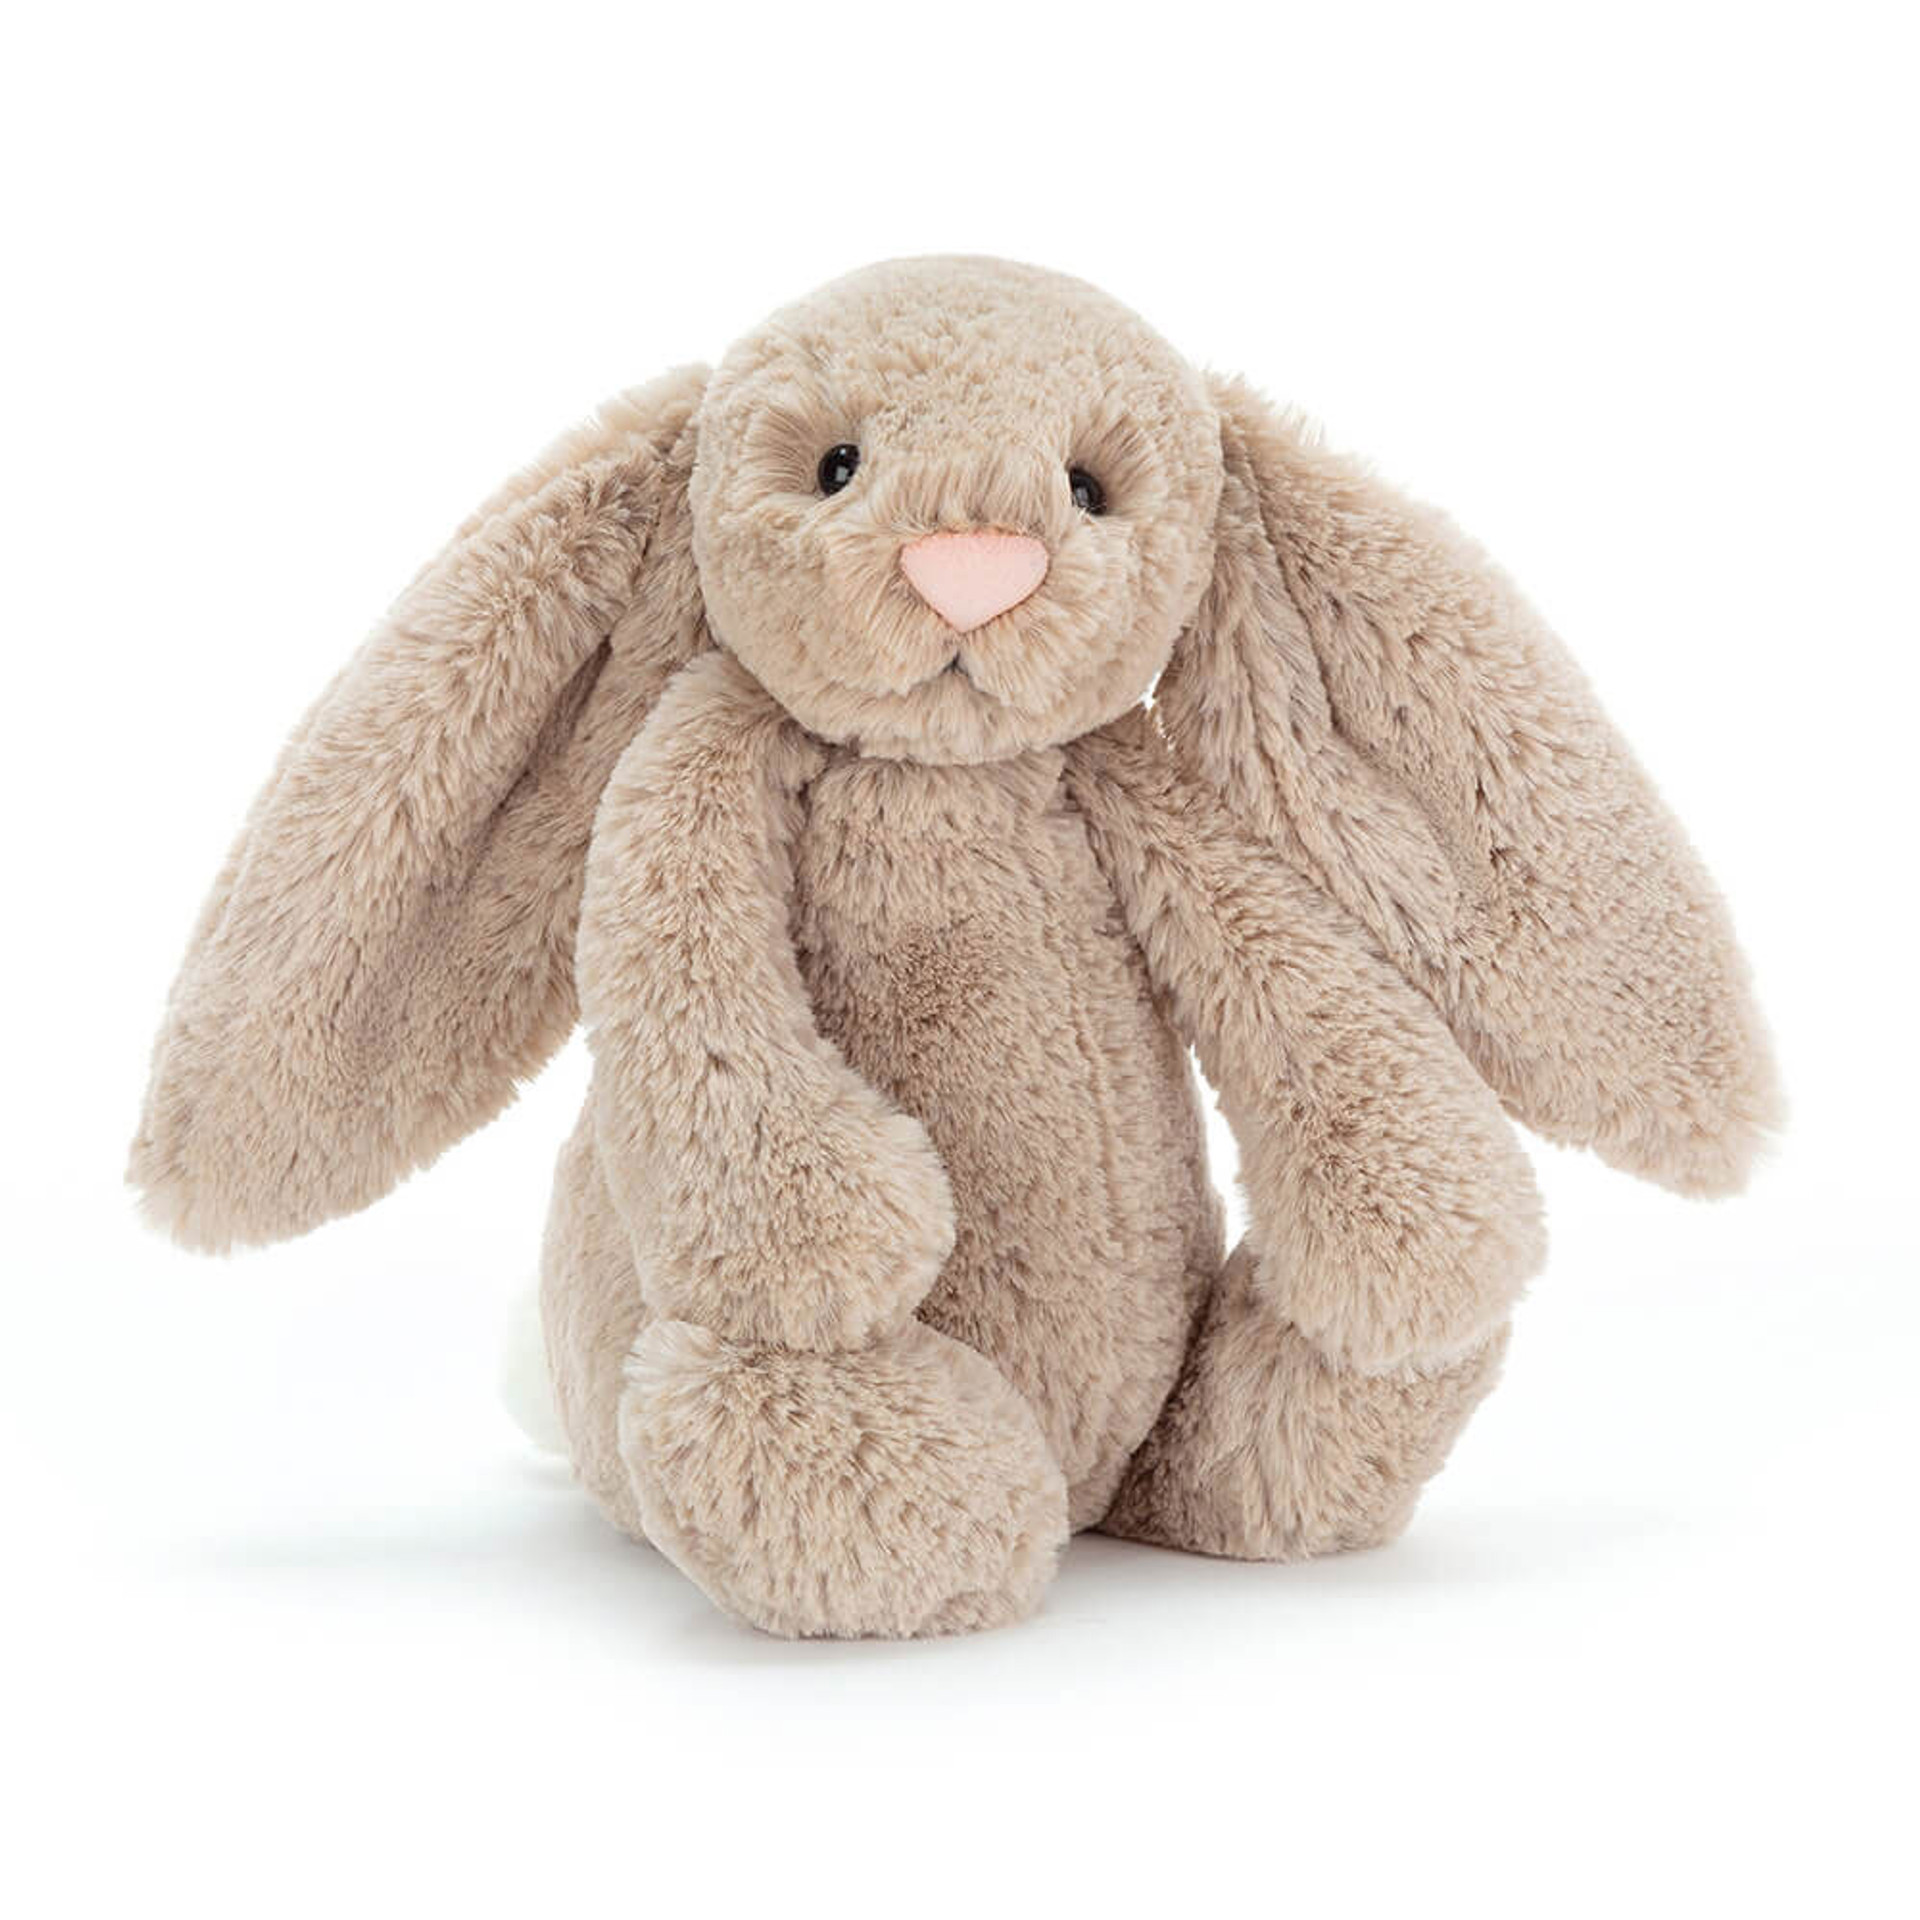 Official Jellycat Store | Jellycat Soft Toys & Gifts